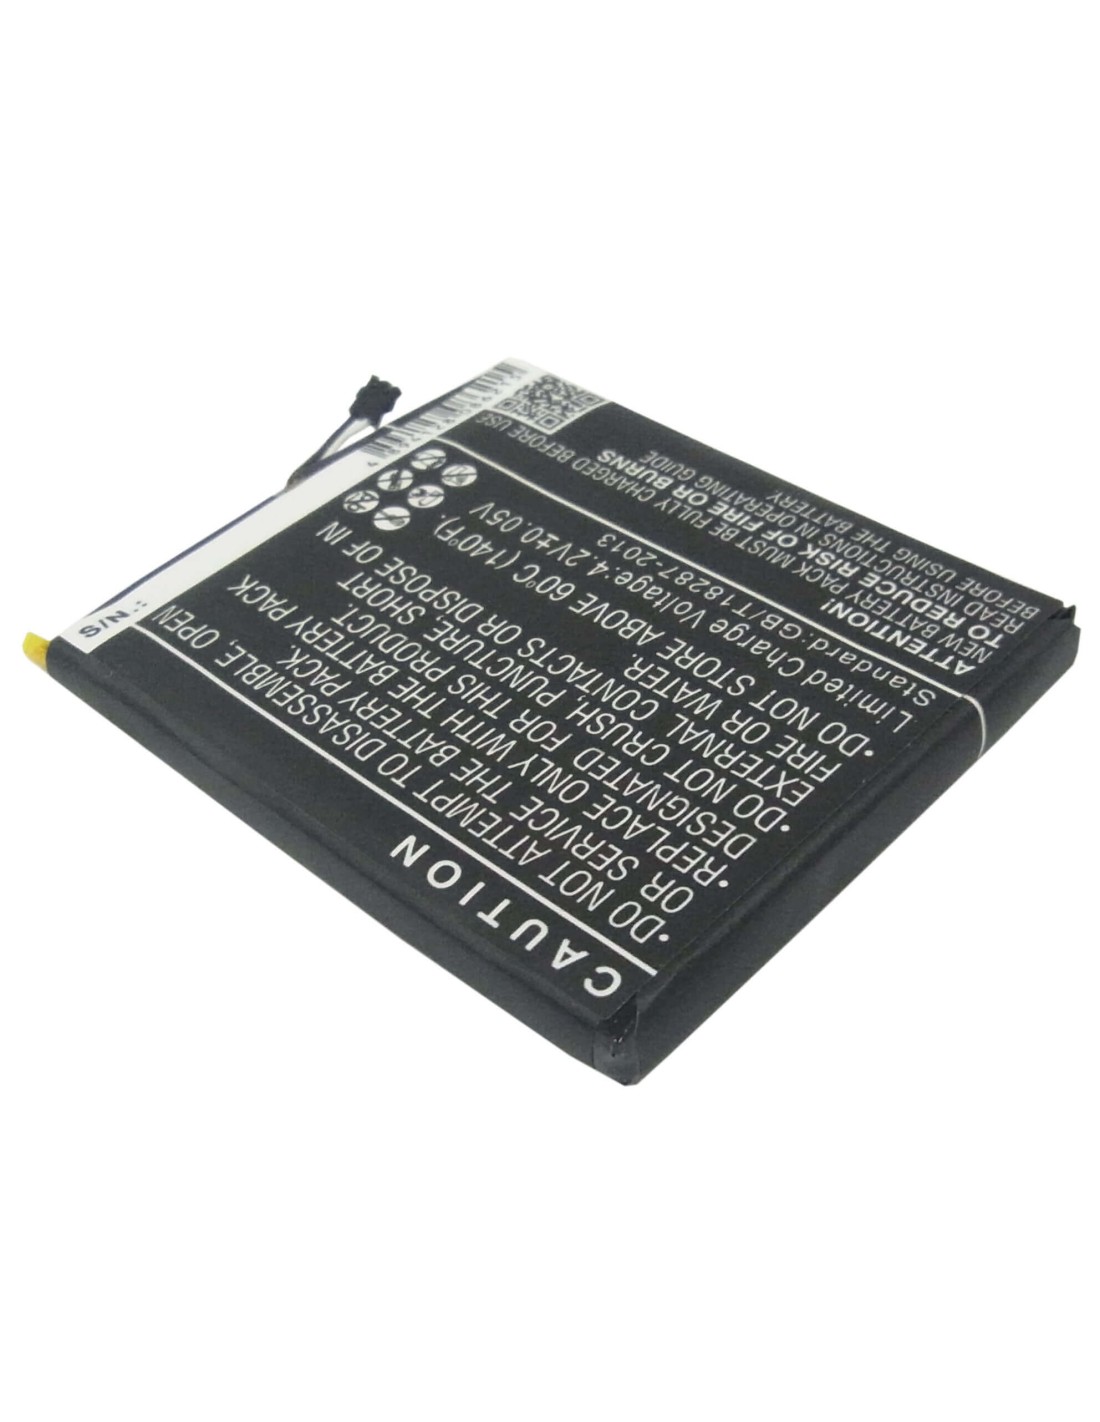 Battery for Clear Ifm-910cw, Ifm-930cw, Imw-c910w 3.7V, 1700mAh - 6.29Wh